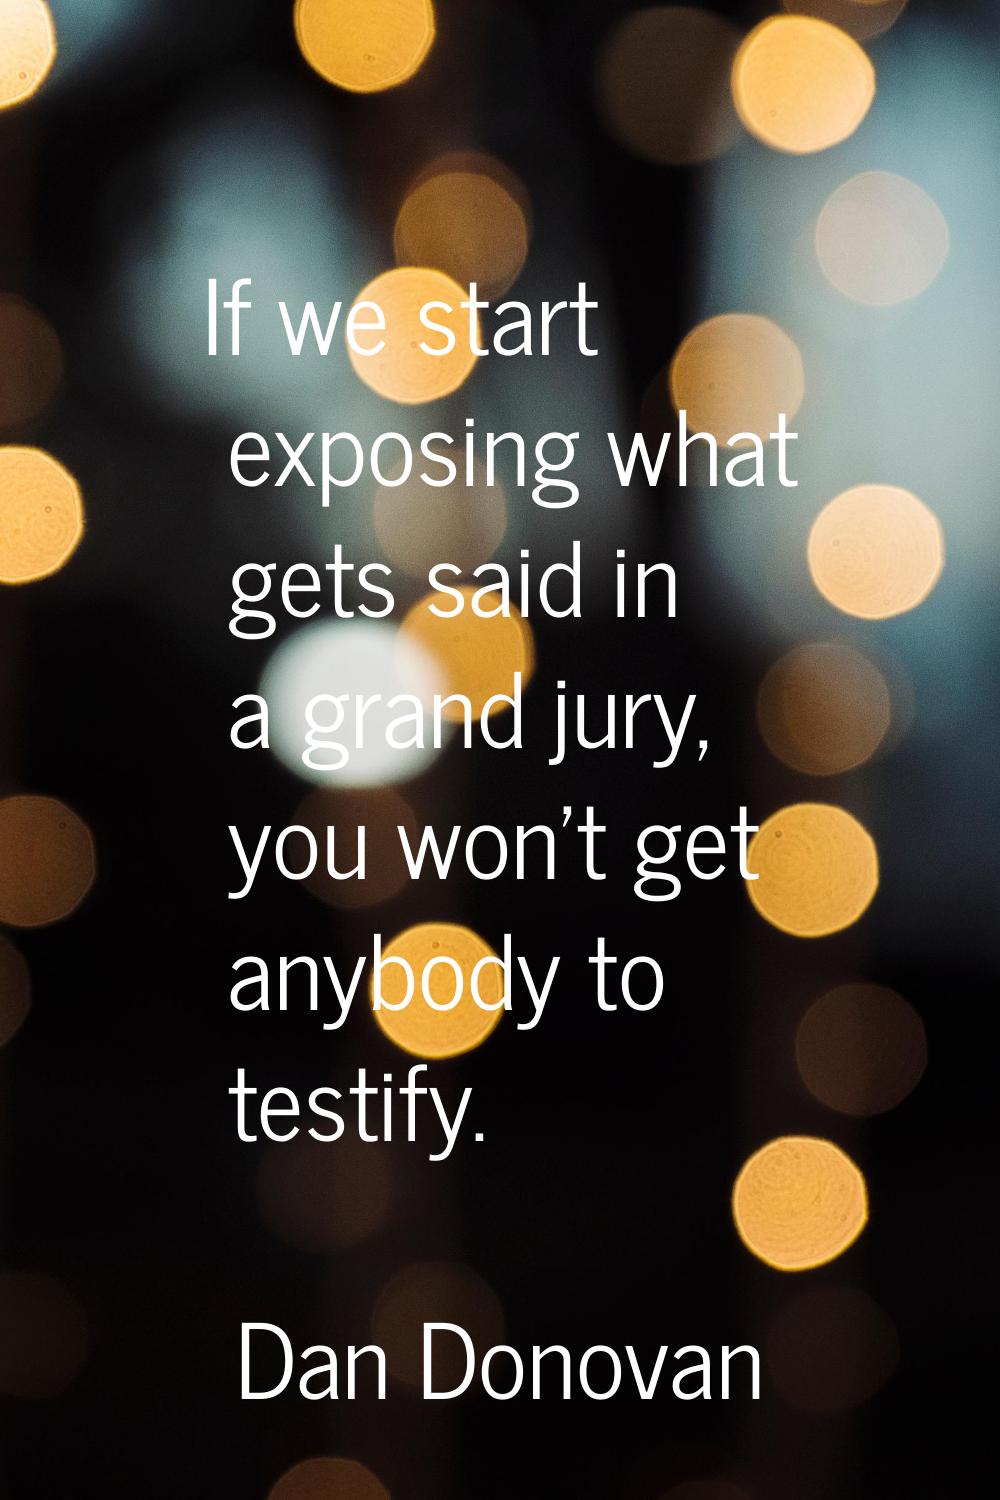 If we start exposing what gets said in a grand jury, you won't get anybody to testify.